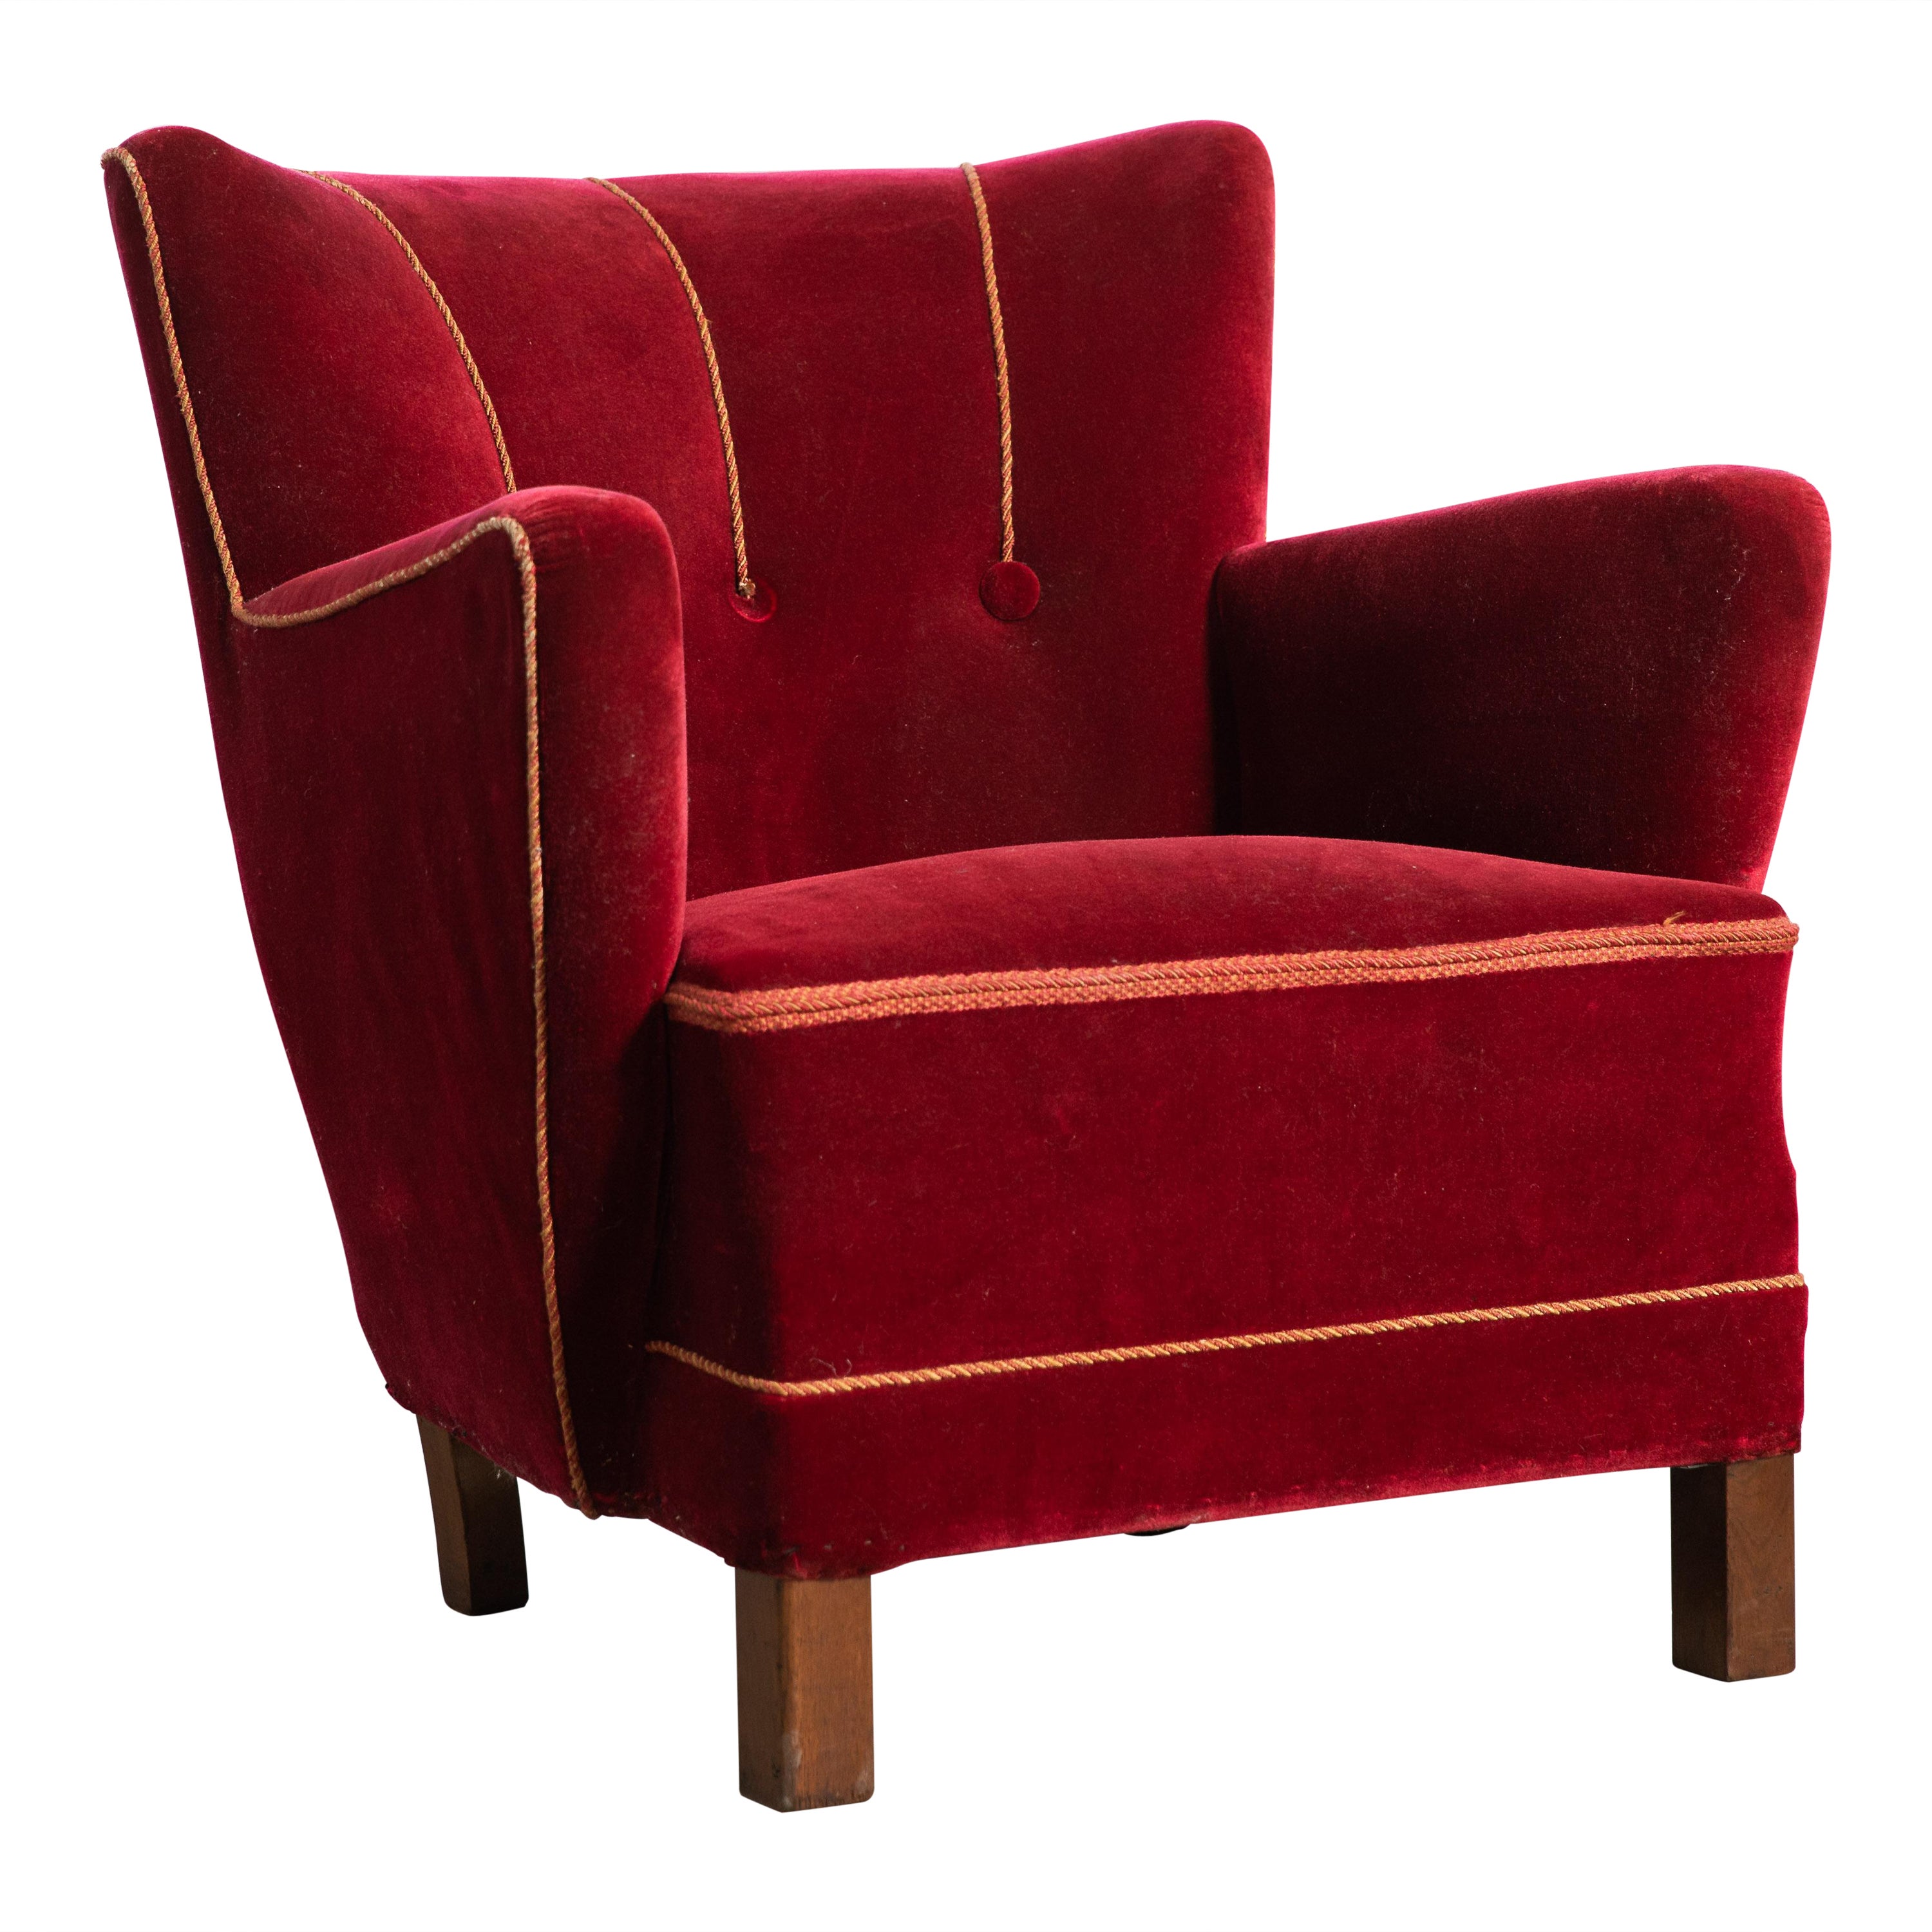 Danish Midcentury 1940s Low Lounge Chair in Red Mohair